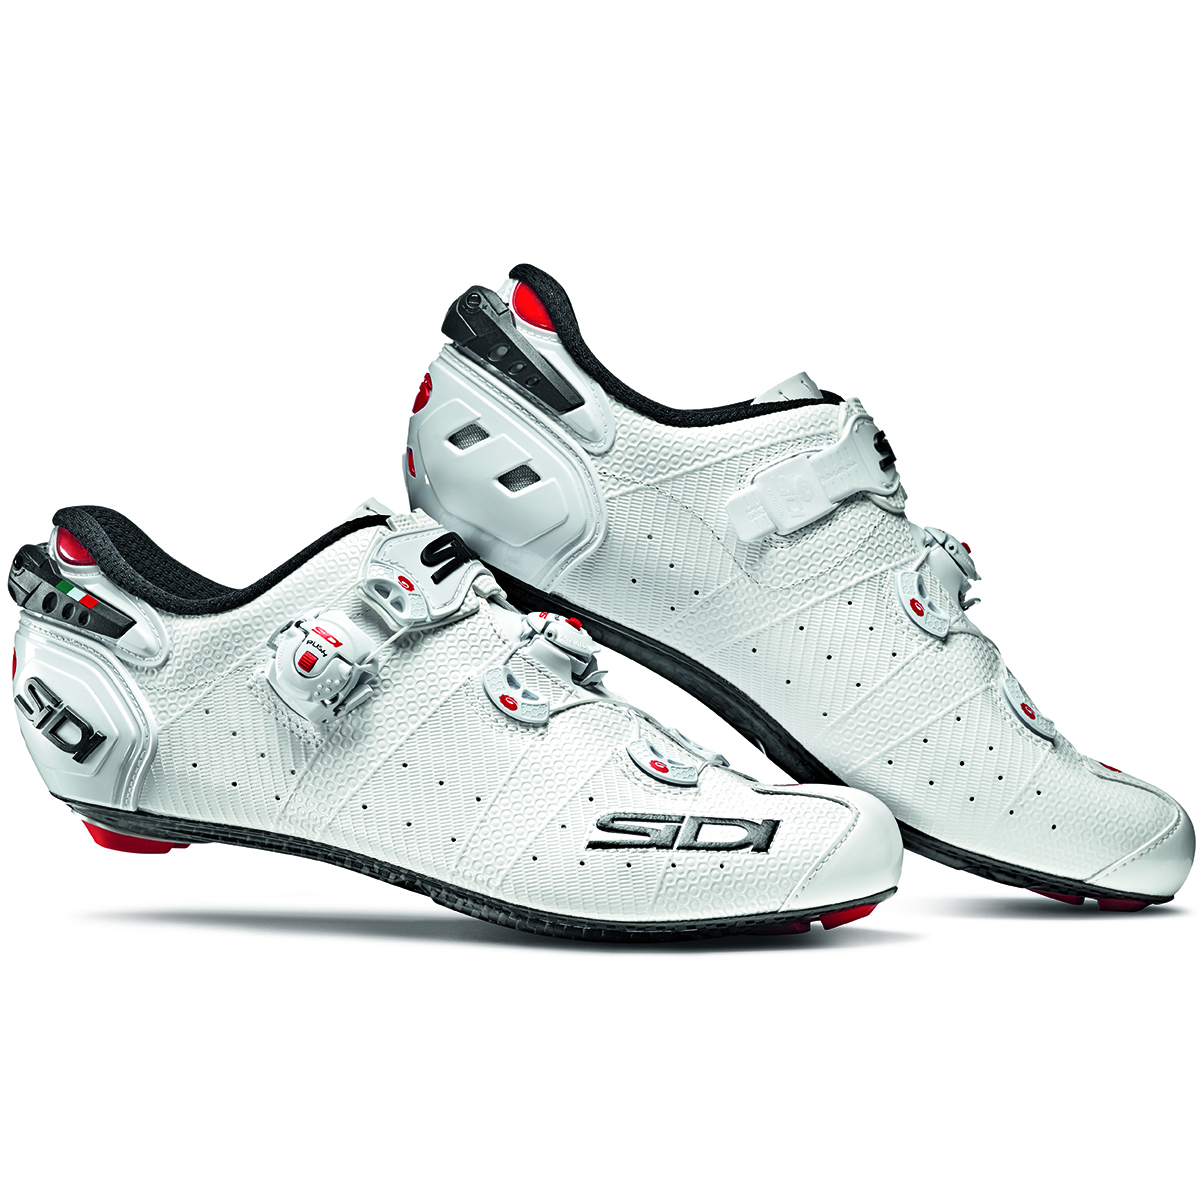 SIDI Wire 2 Carbon Air LTD Road Cycling Shoes-Blue/Red Iridesc Size: 38~47 EUR 